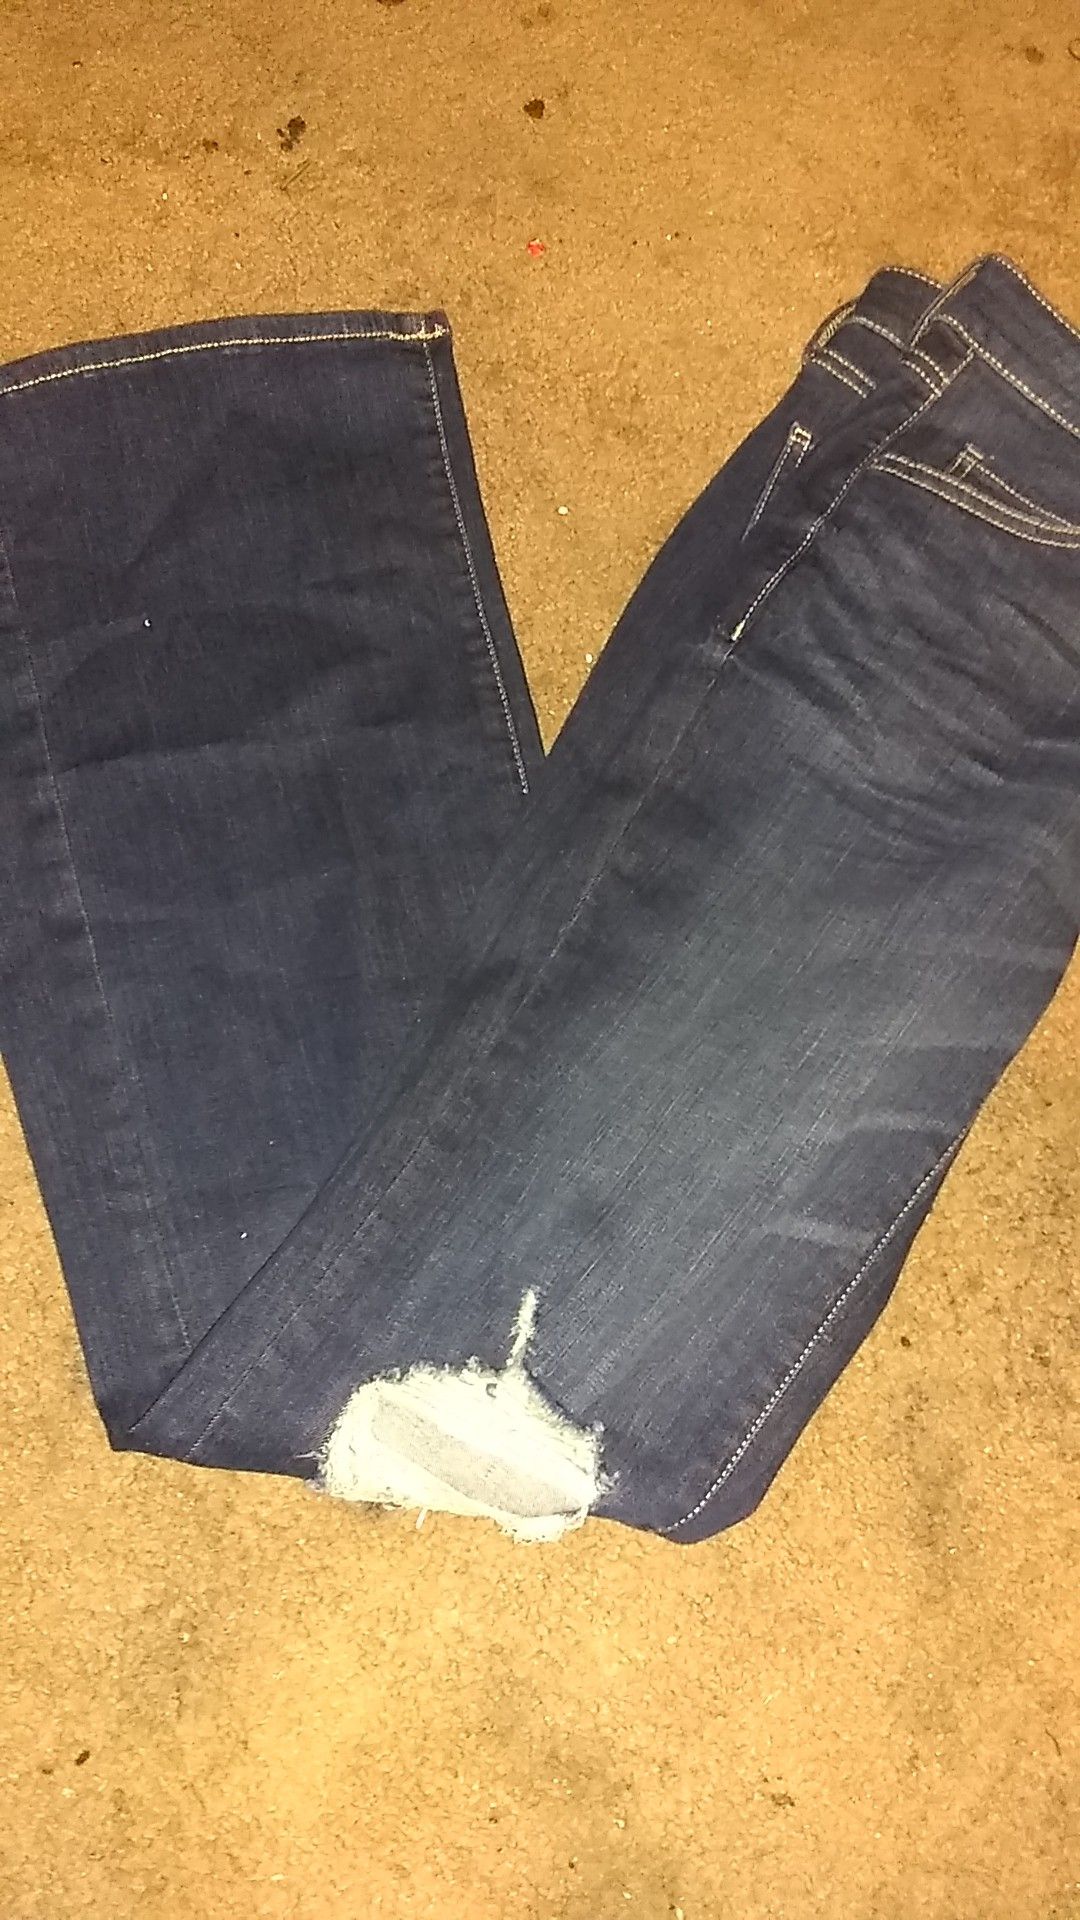 Low rise boot cut jeans size 9 there's no tags and text me for more info